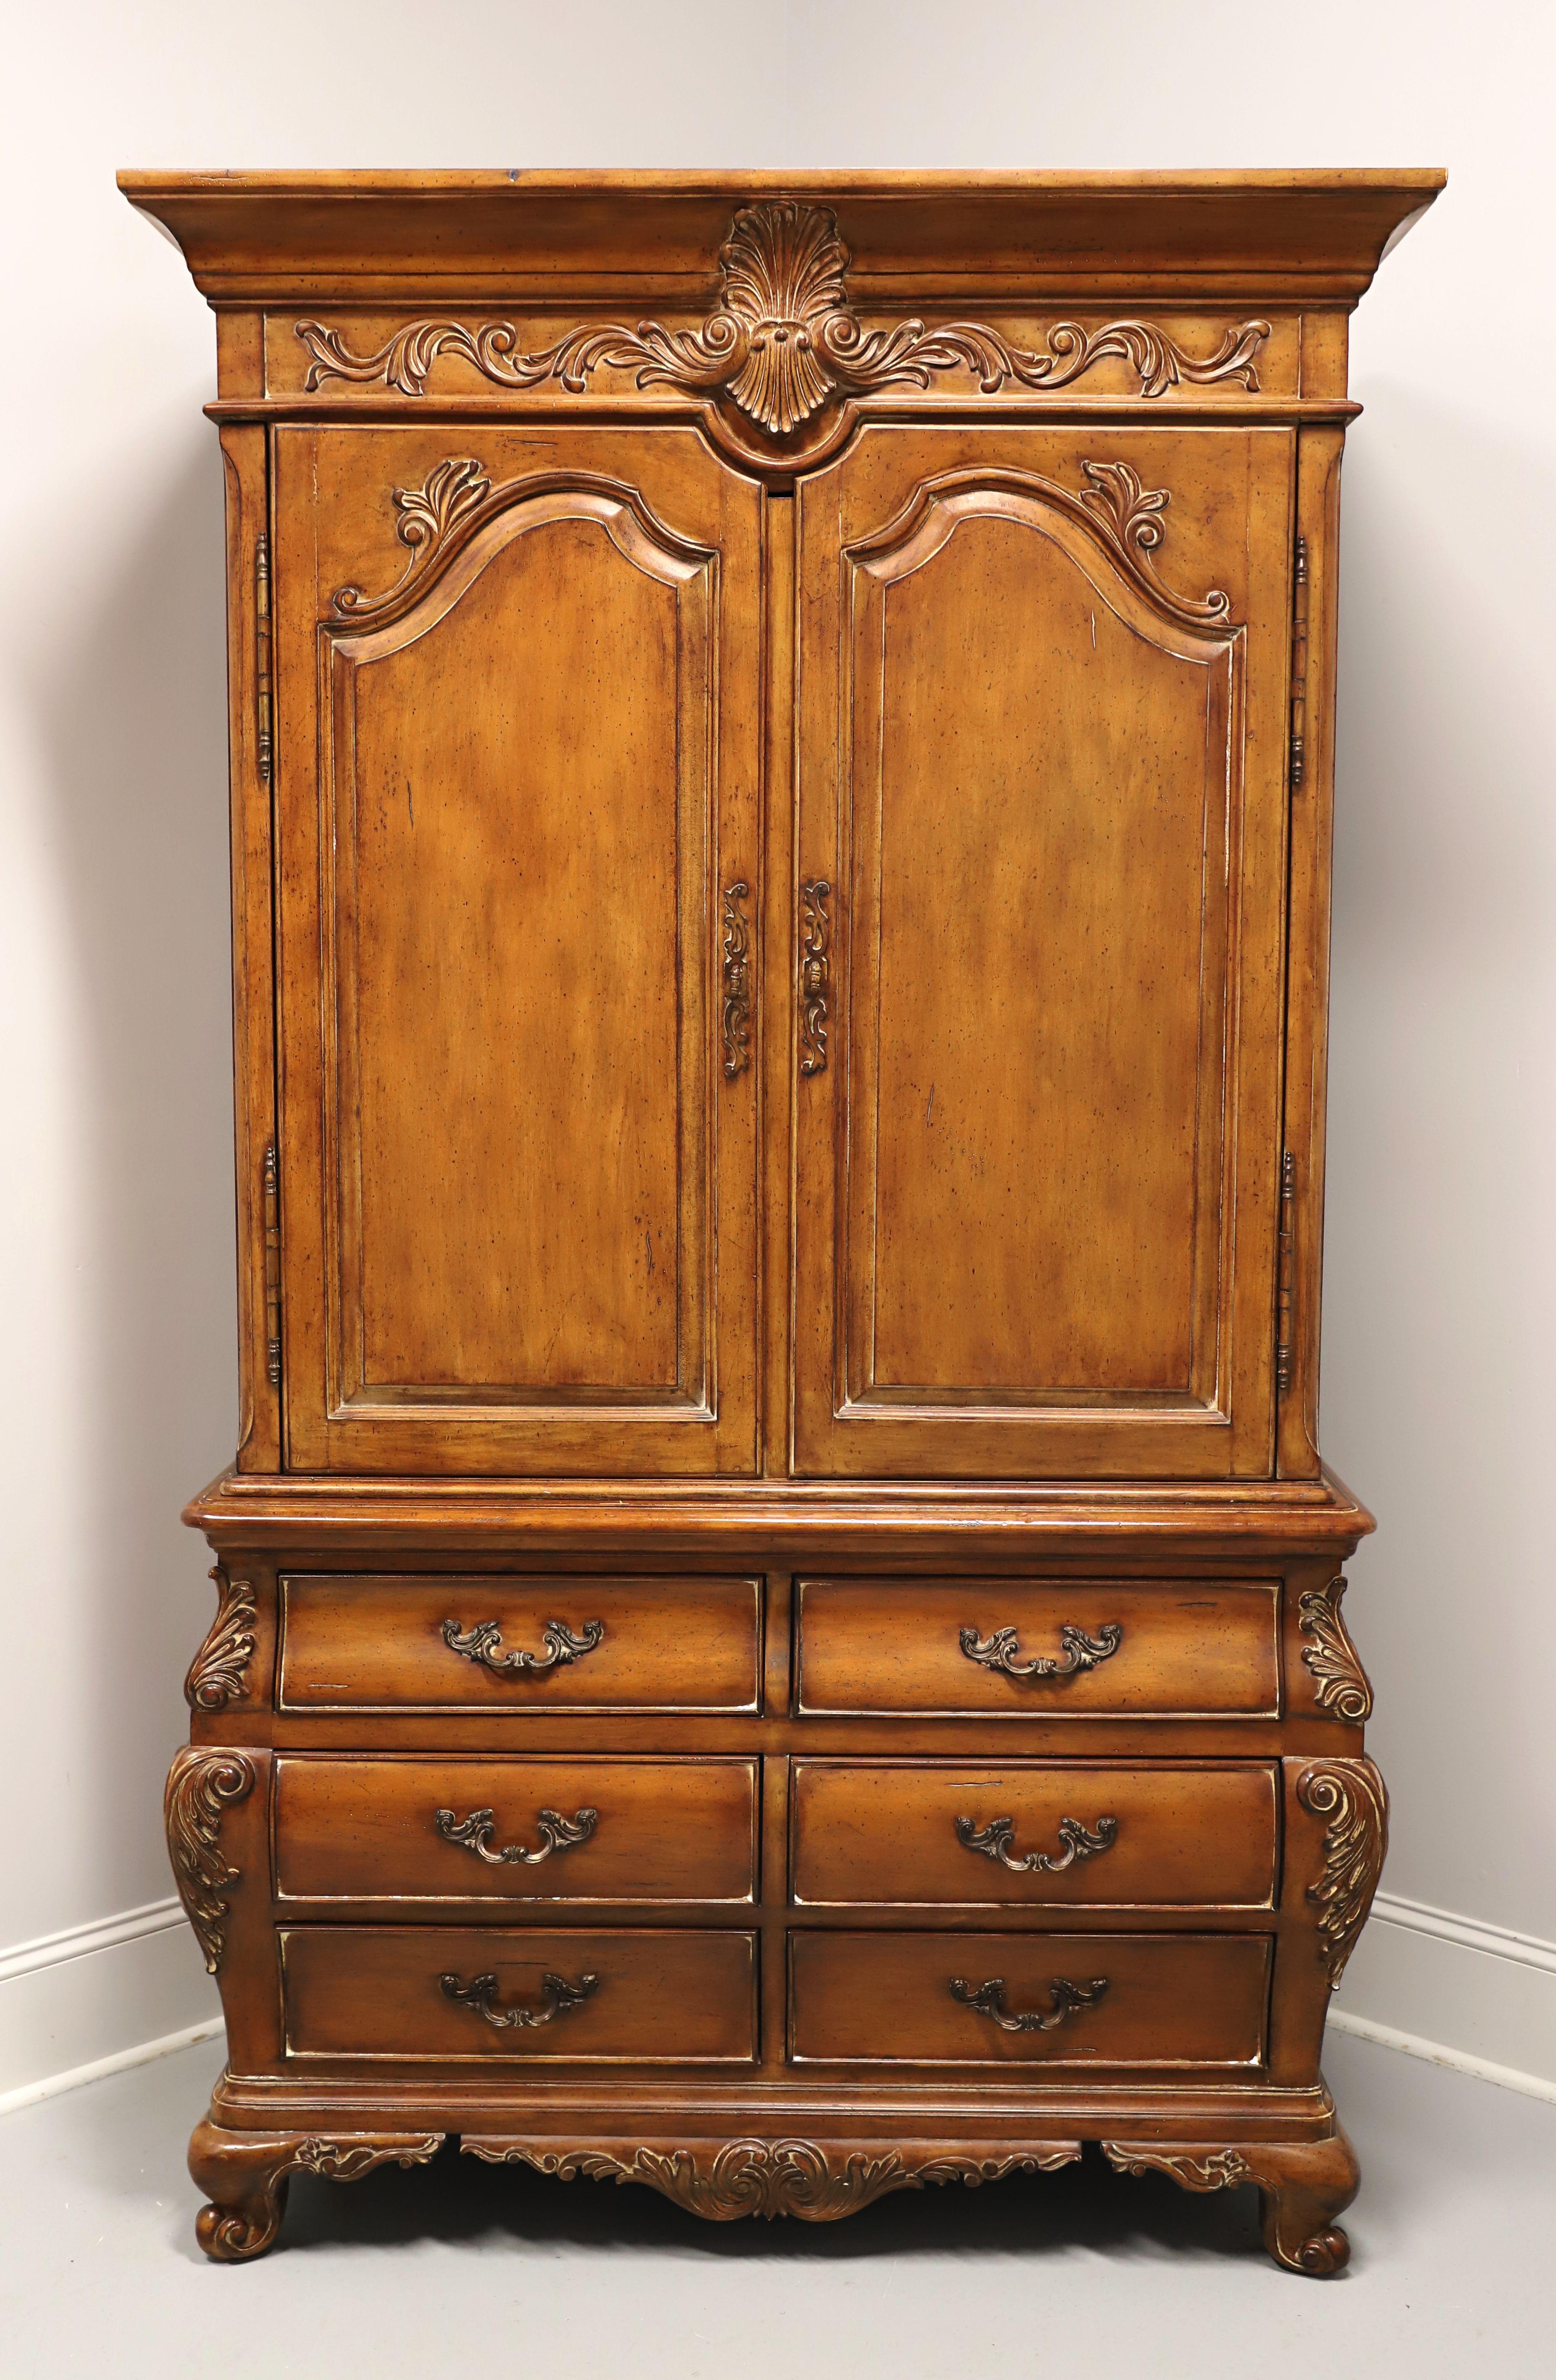 An armoire / linen press in the French Country style by Thomasville, from their Chateau Provence Collection. Walnut with brass hardware, a slightly distressed finish, crown molding to the top, decorative carving to the frieze above the doors,